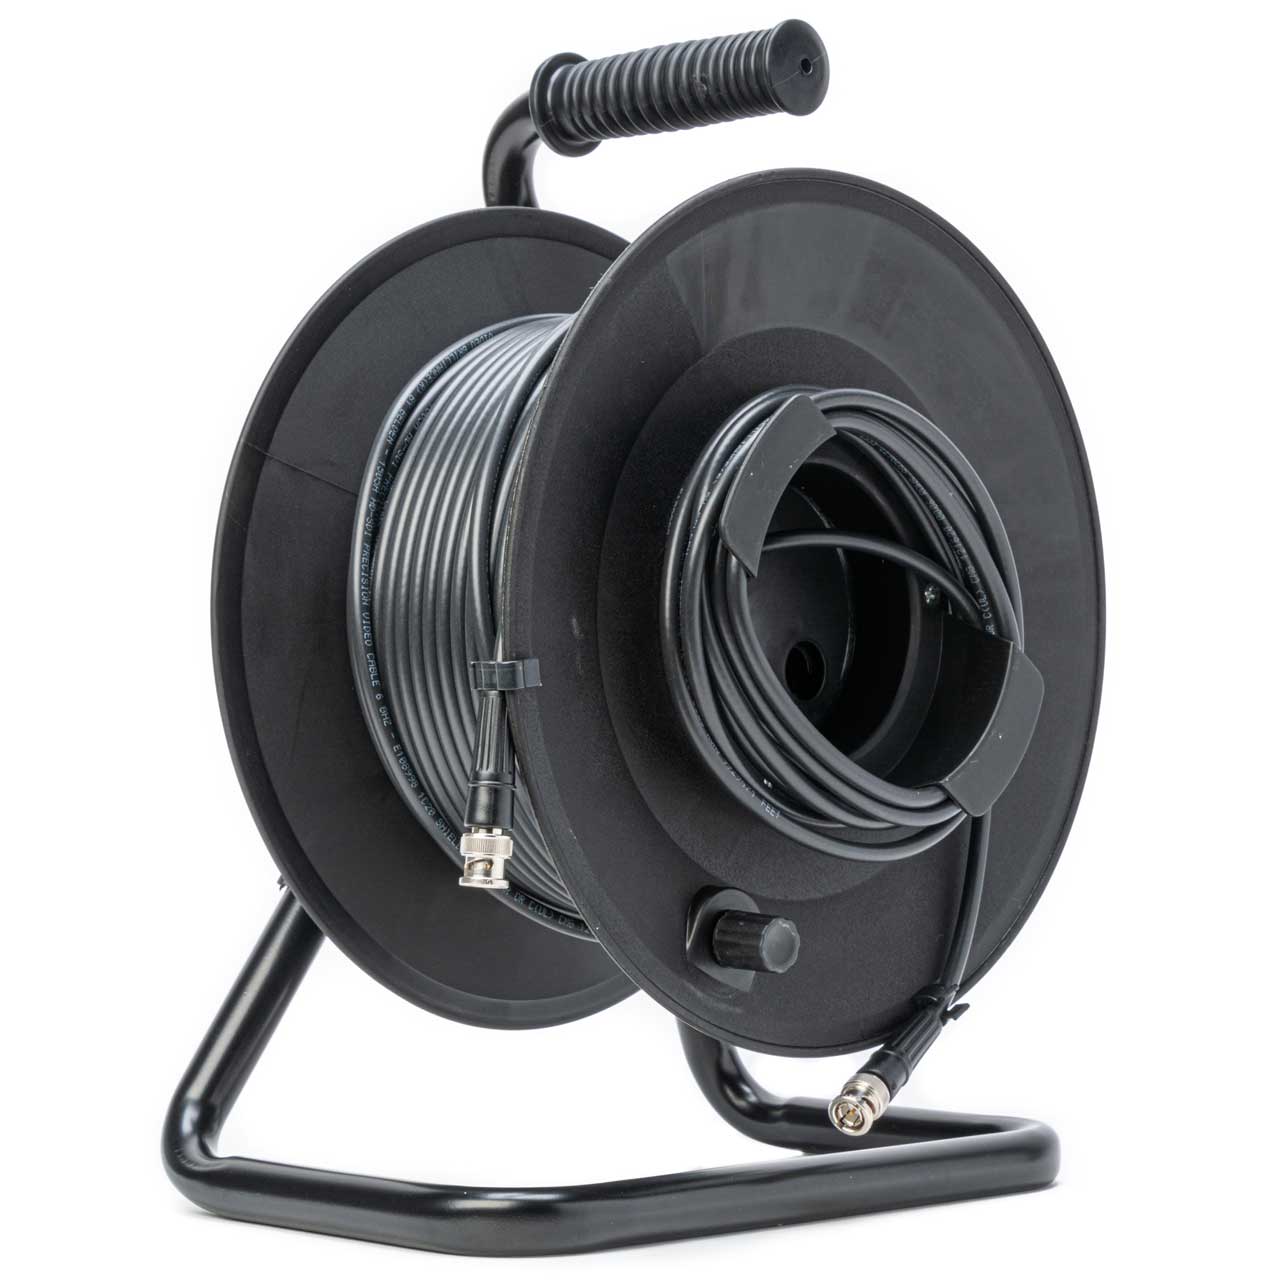 MarkerReel 1-Channel BNC 3G-SDI Cable Reel with Belden 1505A RG59 - 300 Foot